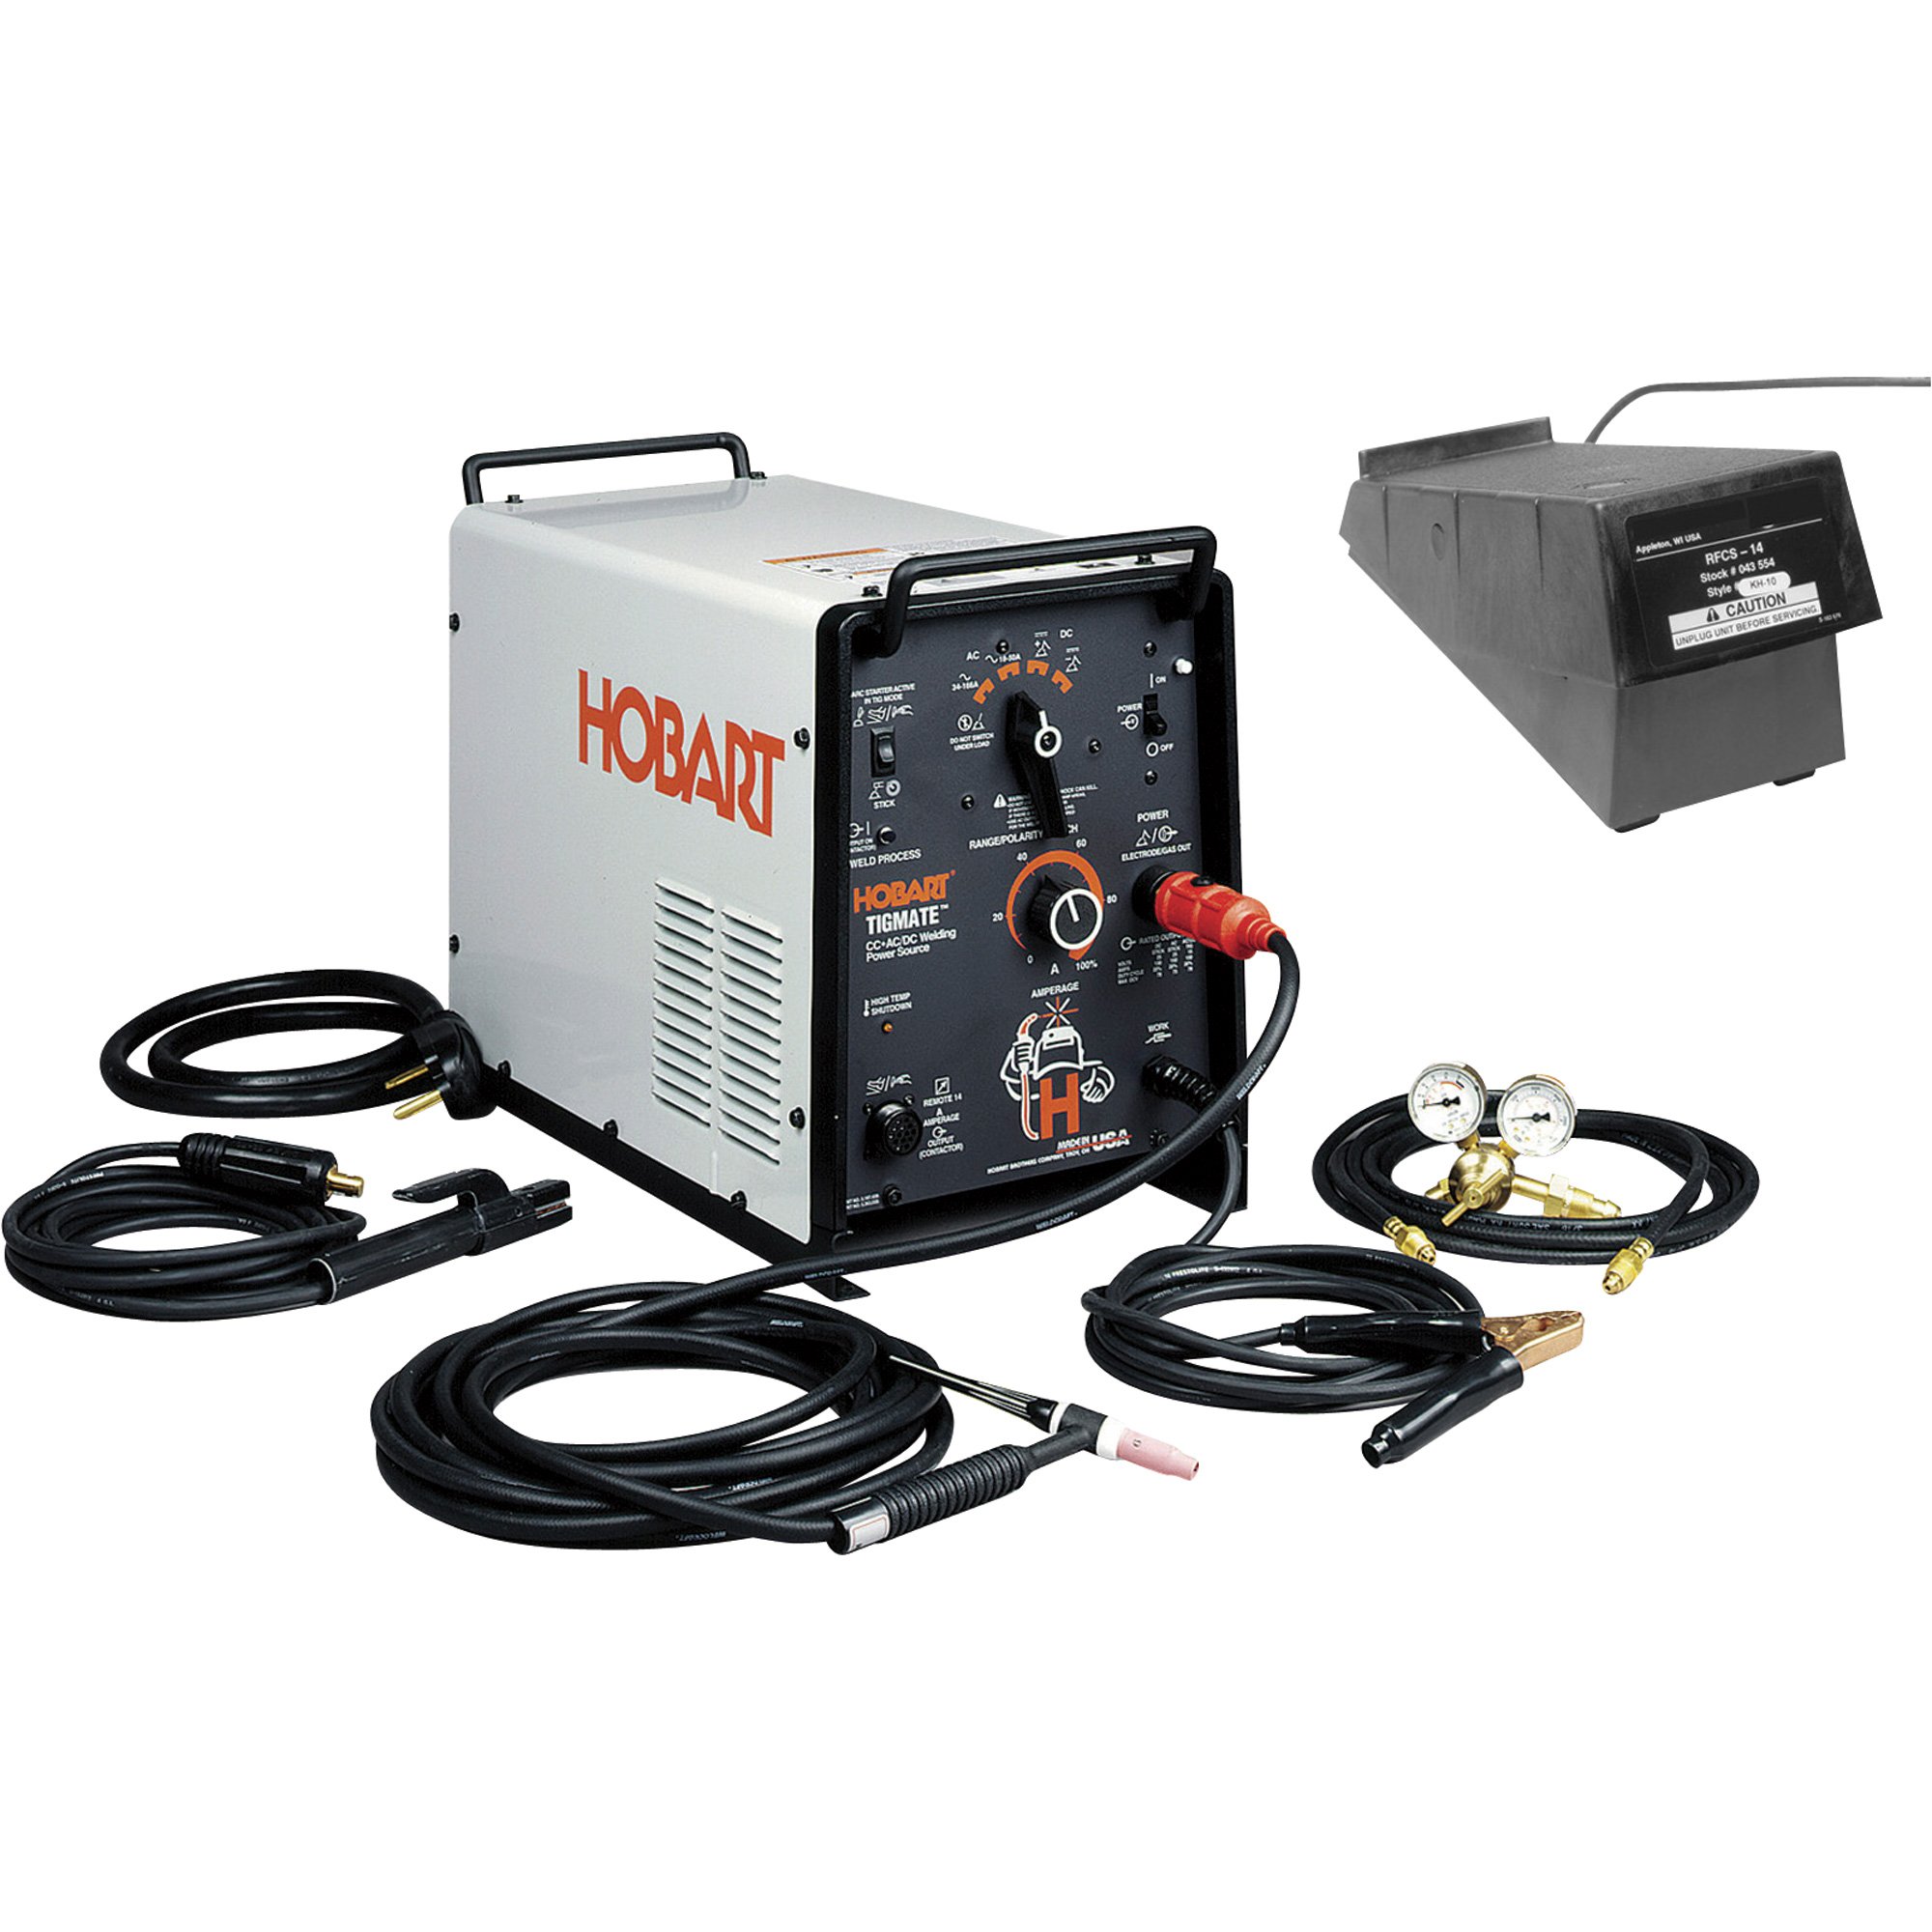 hobart-tigmate-reconditioned-welder-with-foot-control-165-amps-model